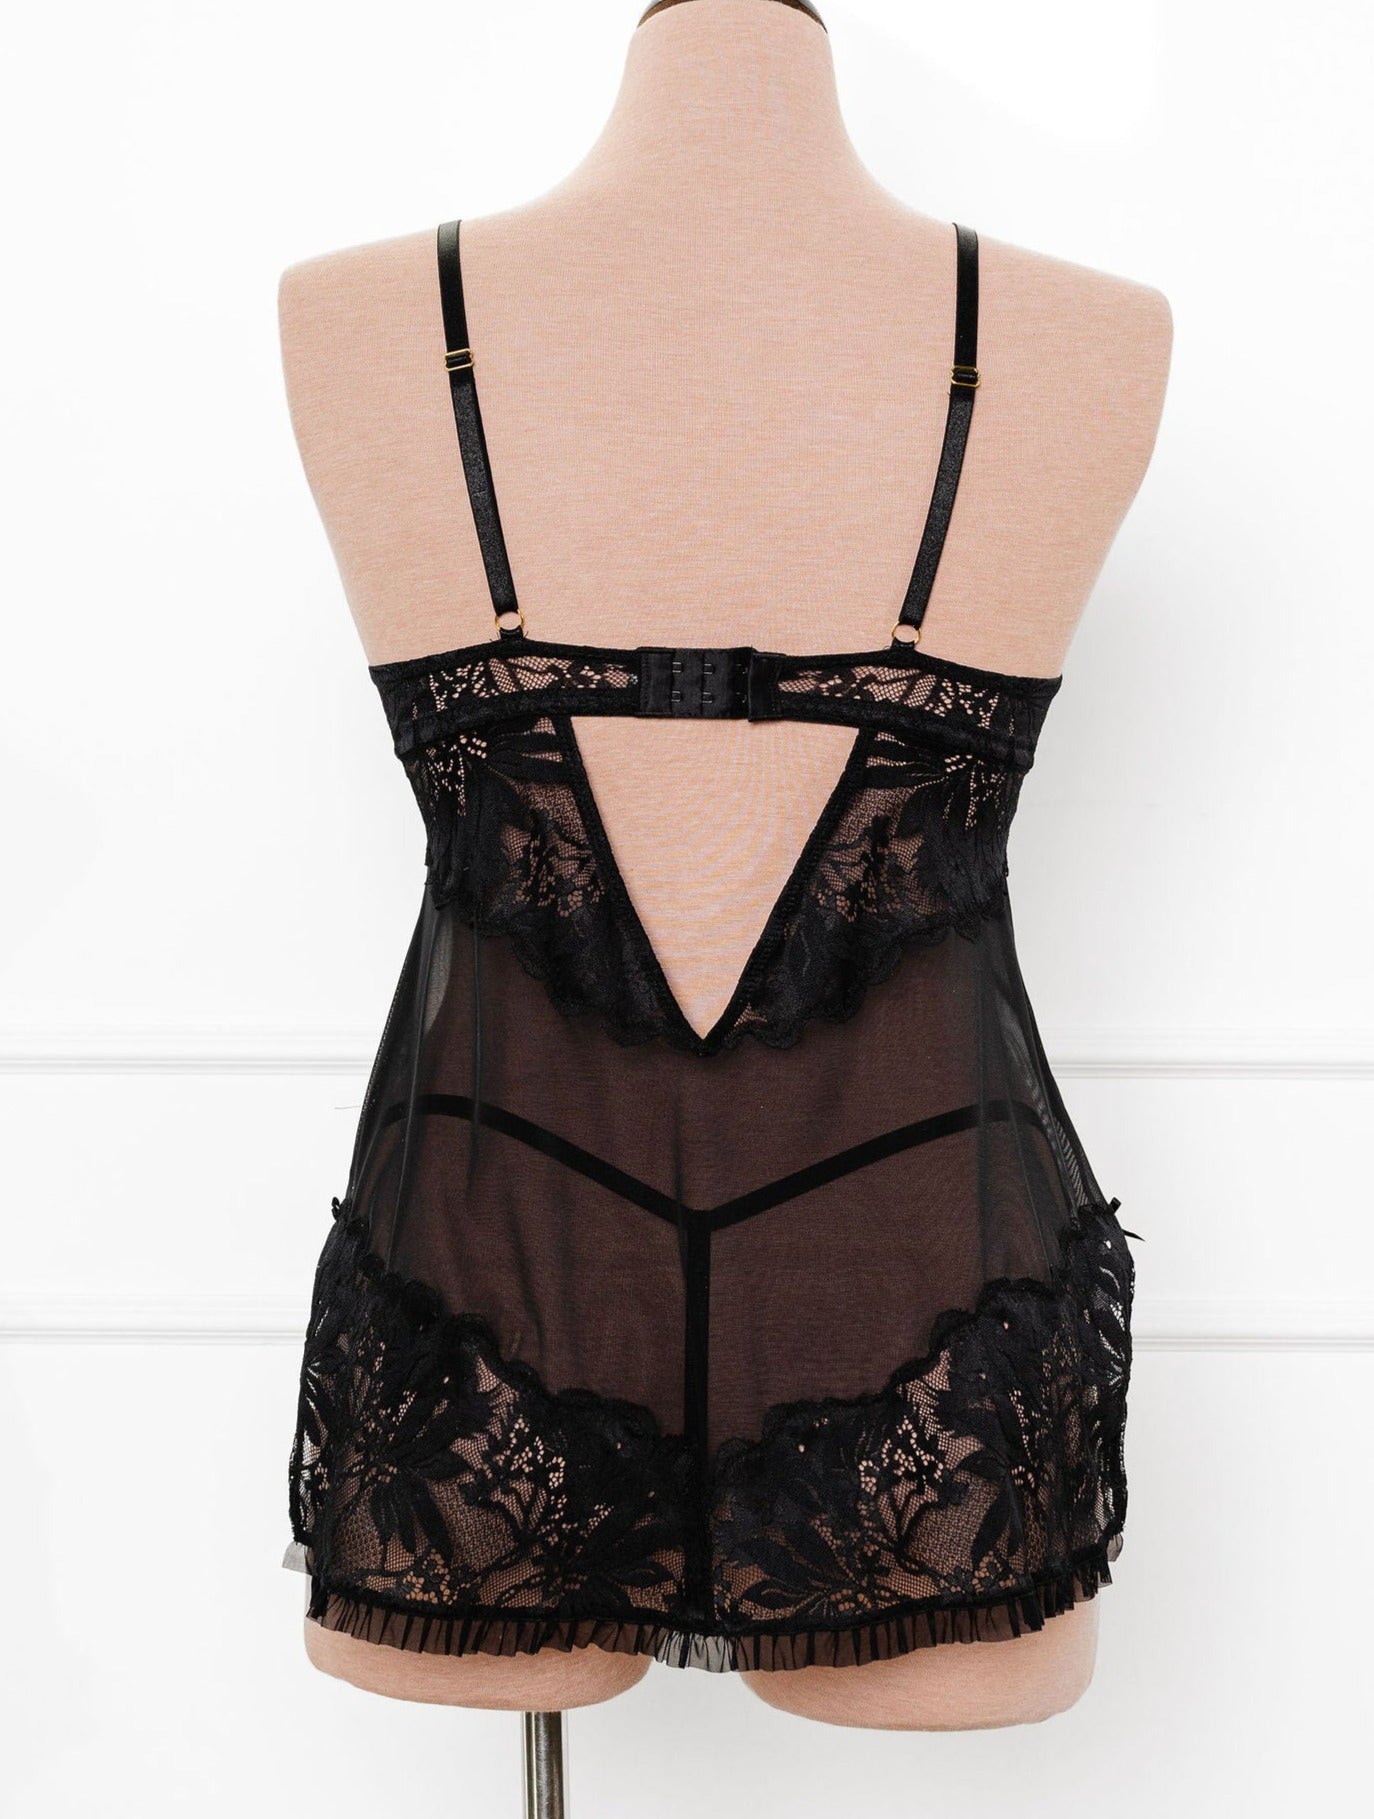 Lace & Mesh Heart Babydoll - Black - Mentionables